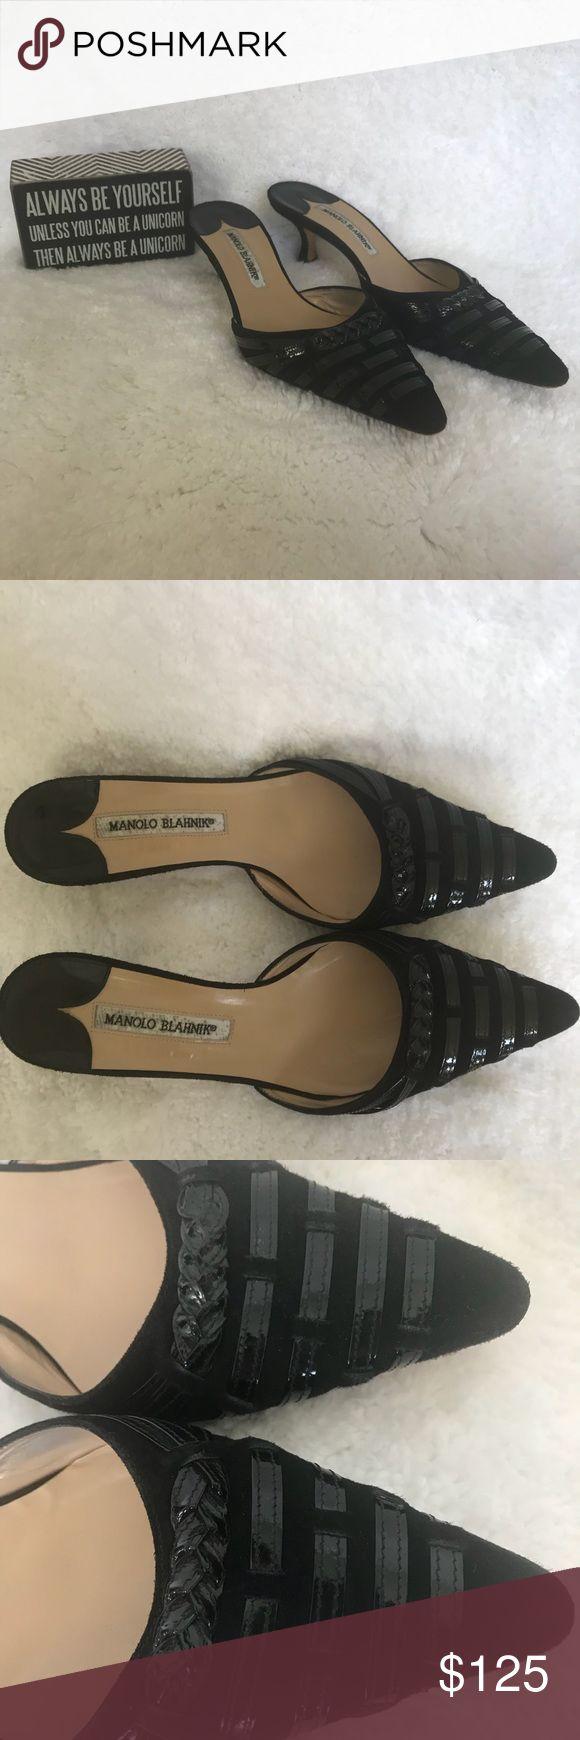 Hochzeit - Manolo Blahnik Kitten Heel Mules Excellent Used Condition Manolos! Size 7.5 The Wear Can Be Seen On The Bottoms In The Picture. Otherwise They Are … 